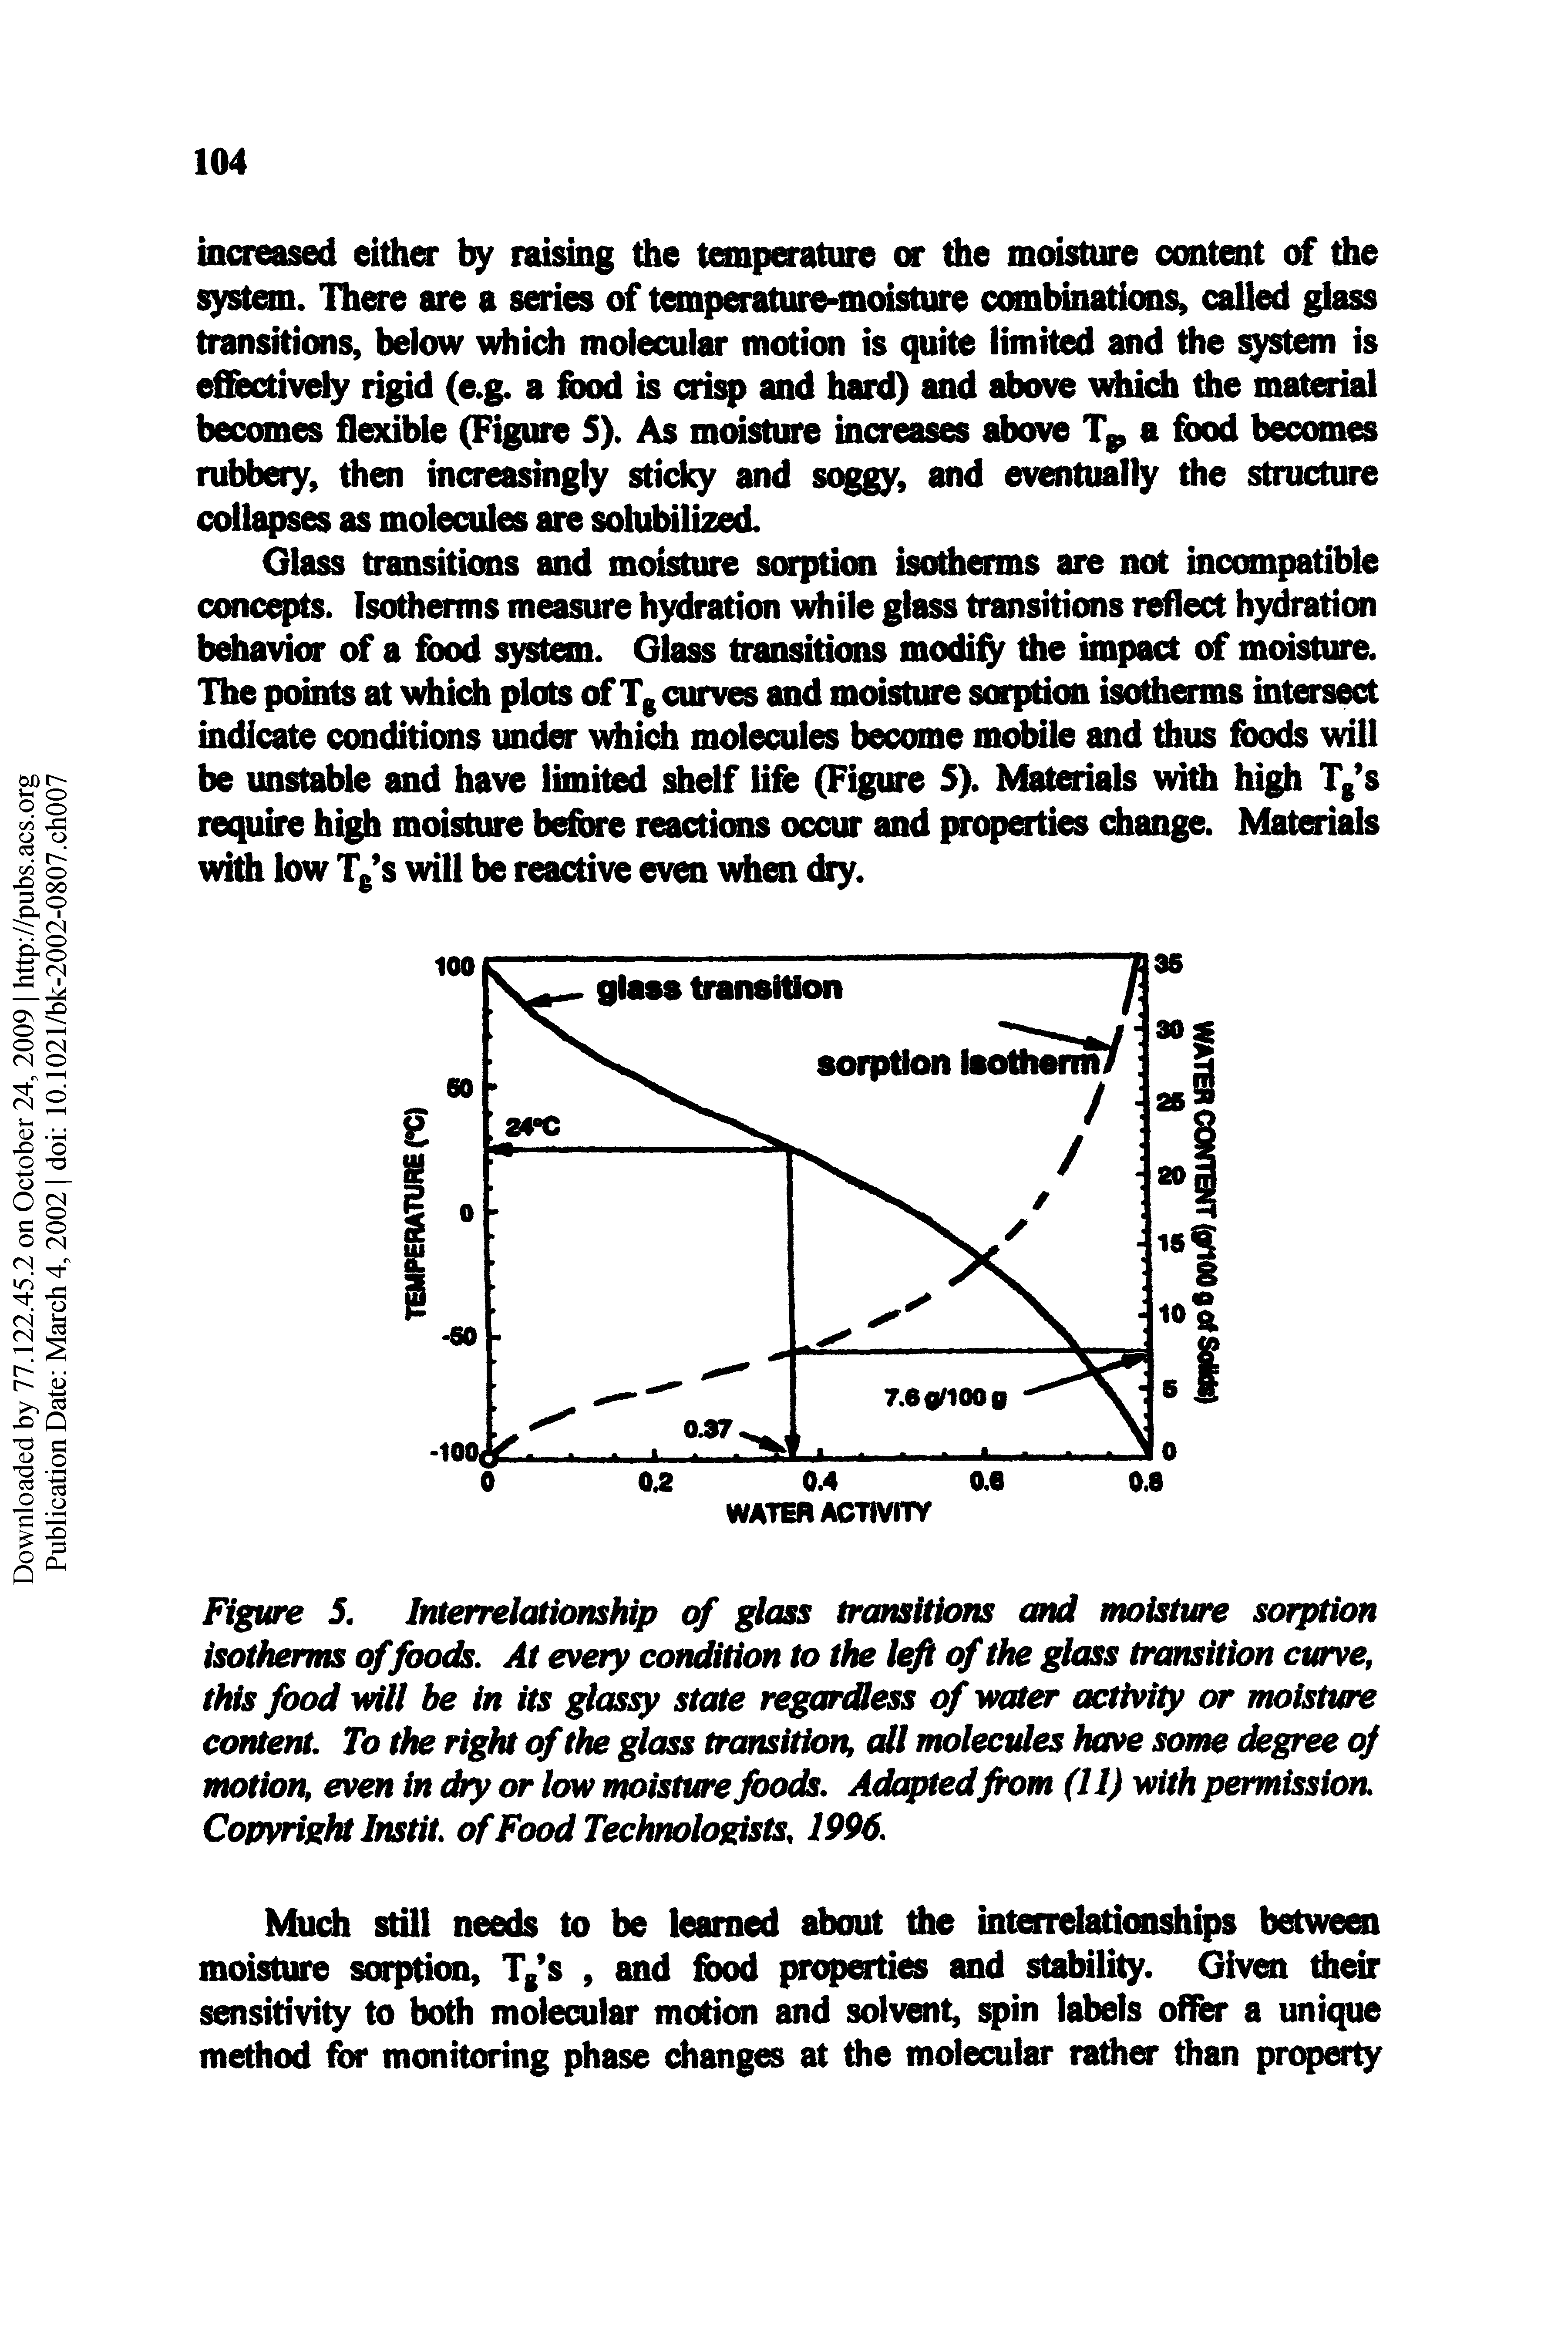 Figure 5. InterrekttUmship of ass tnmsitions aid moistwe sorption isotherms of foods. At every condition to the of the glass transition curve,...